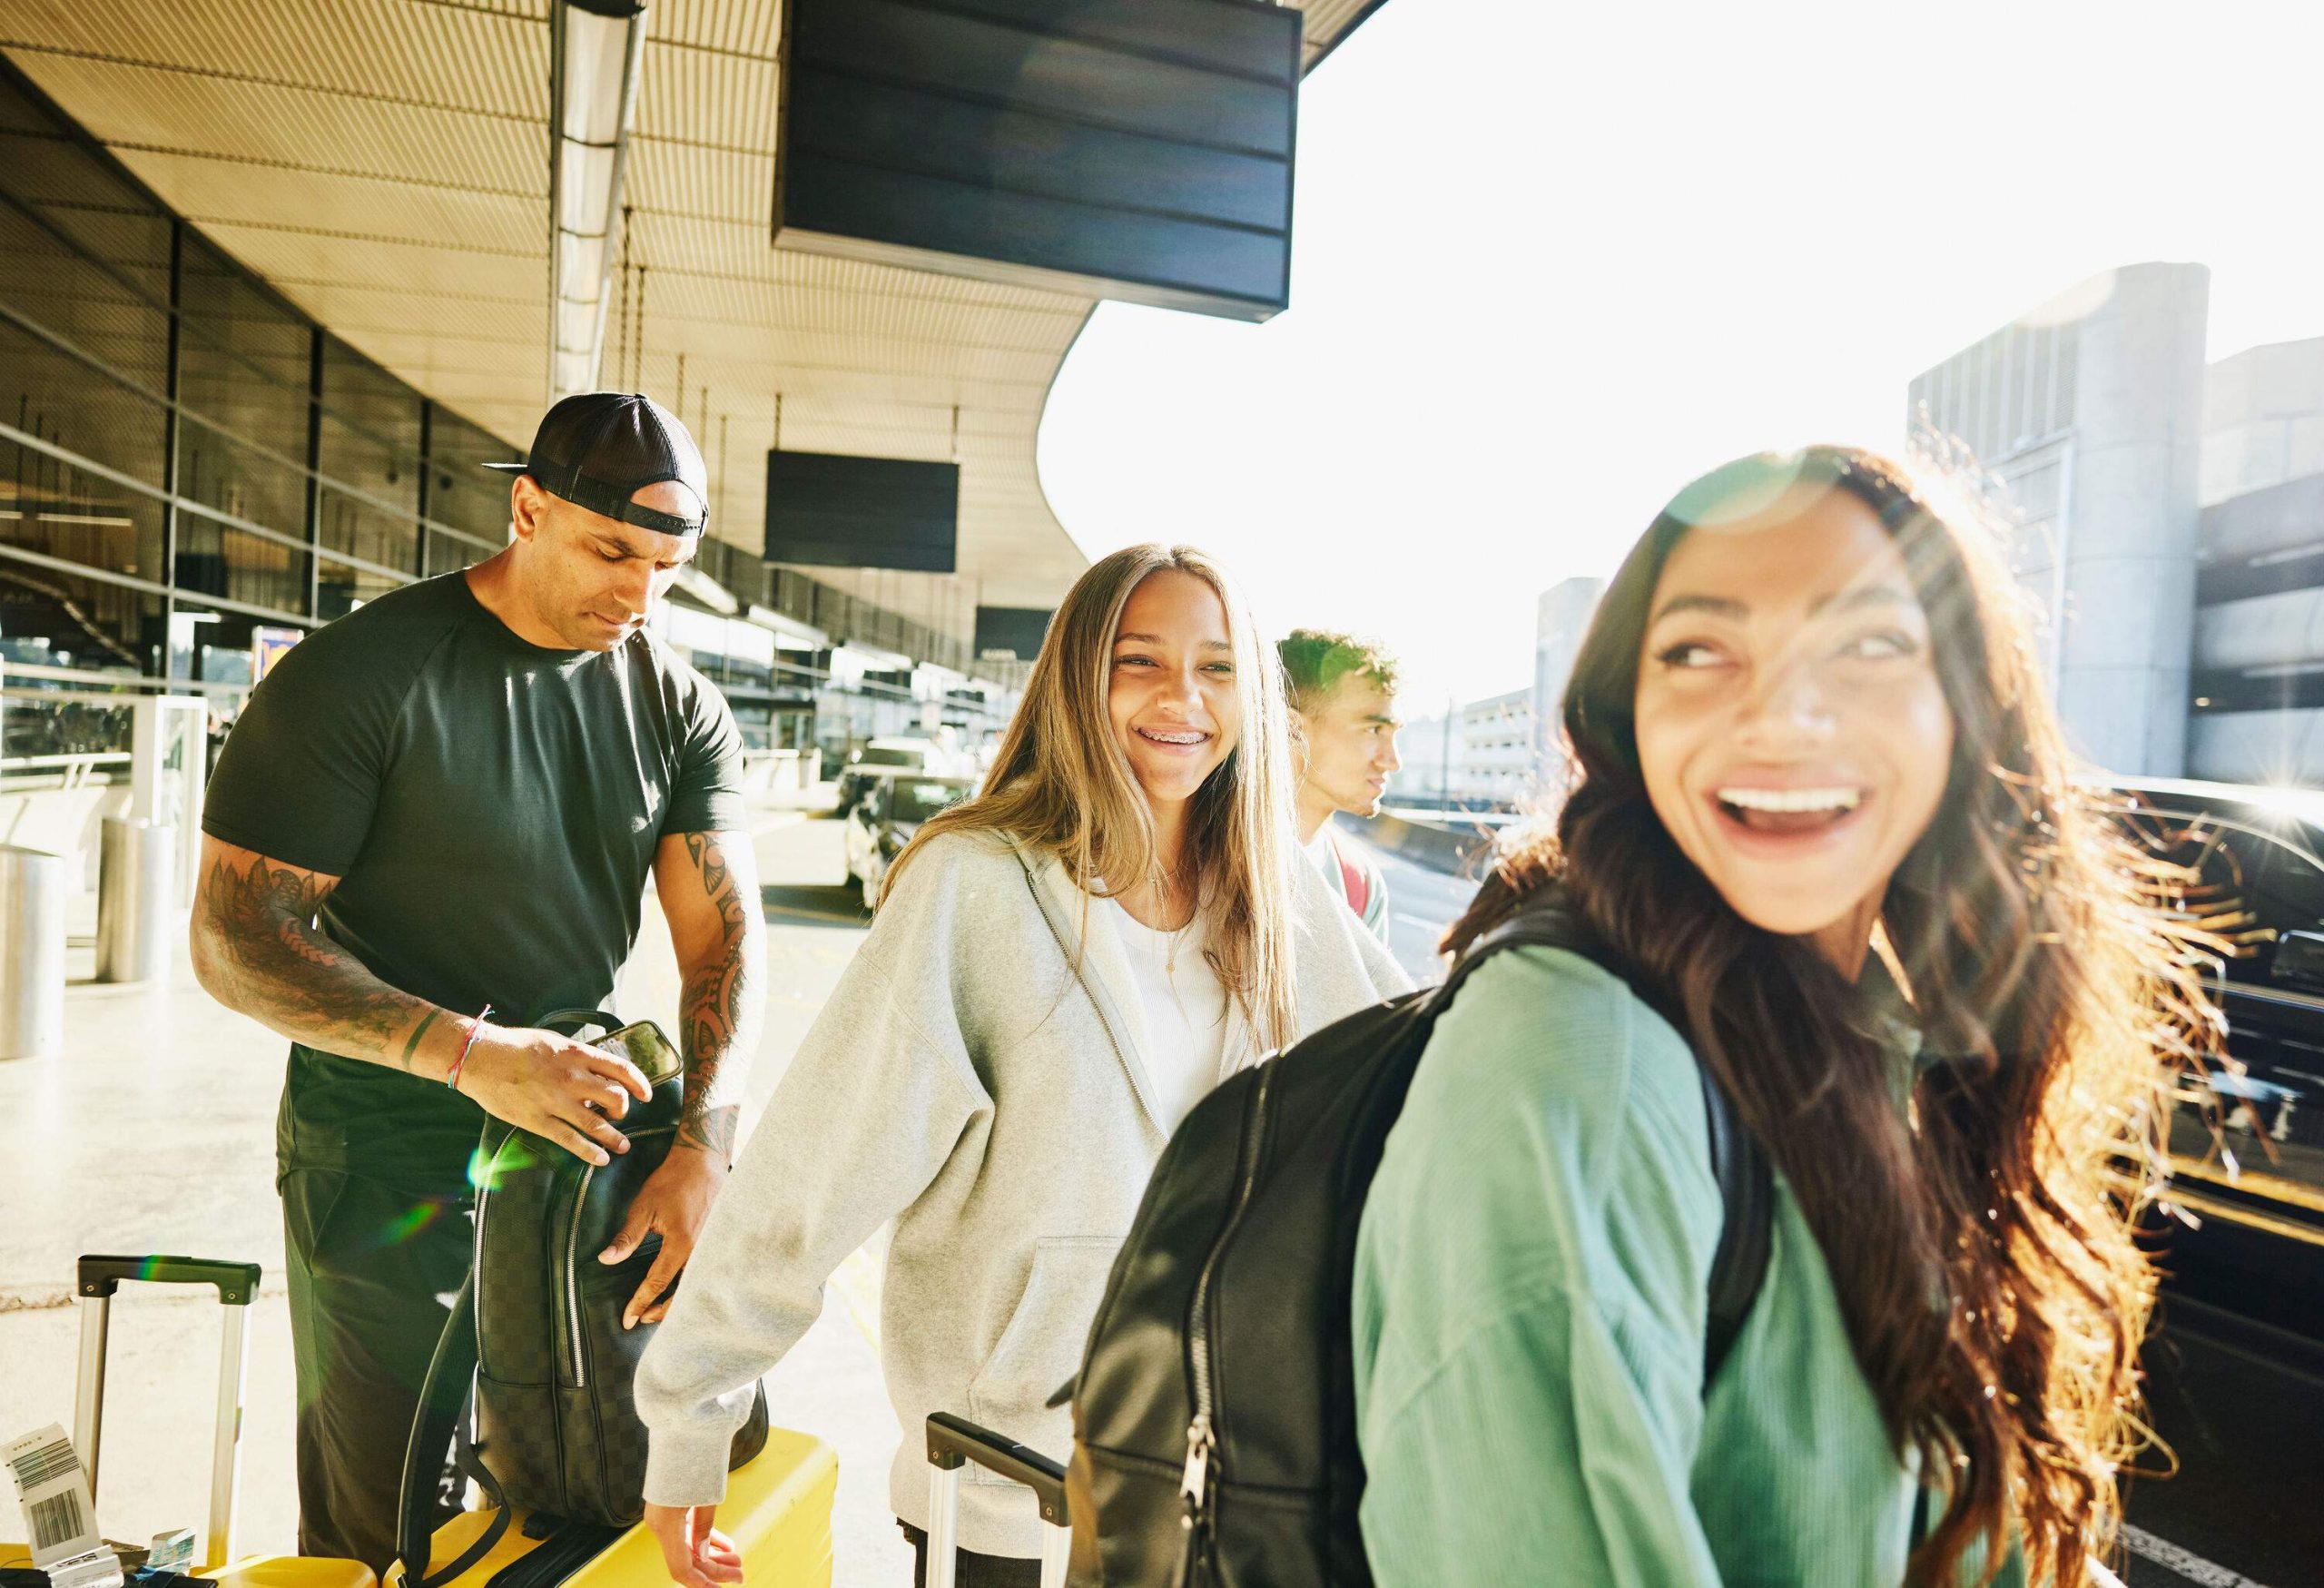 A group of happy people with their luggage stands on the curbside of an airport.